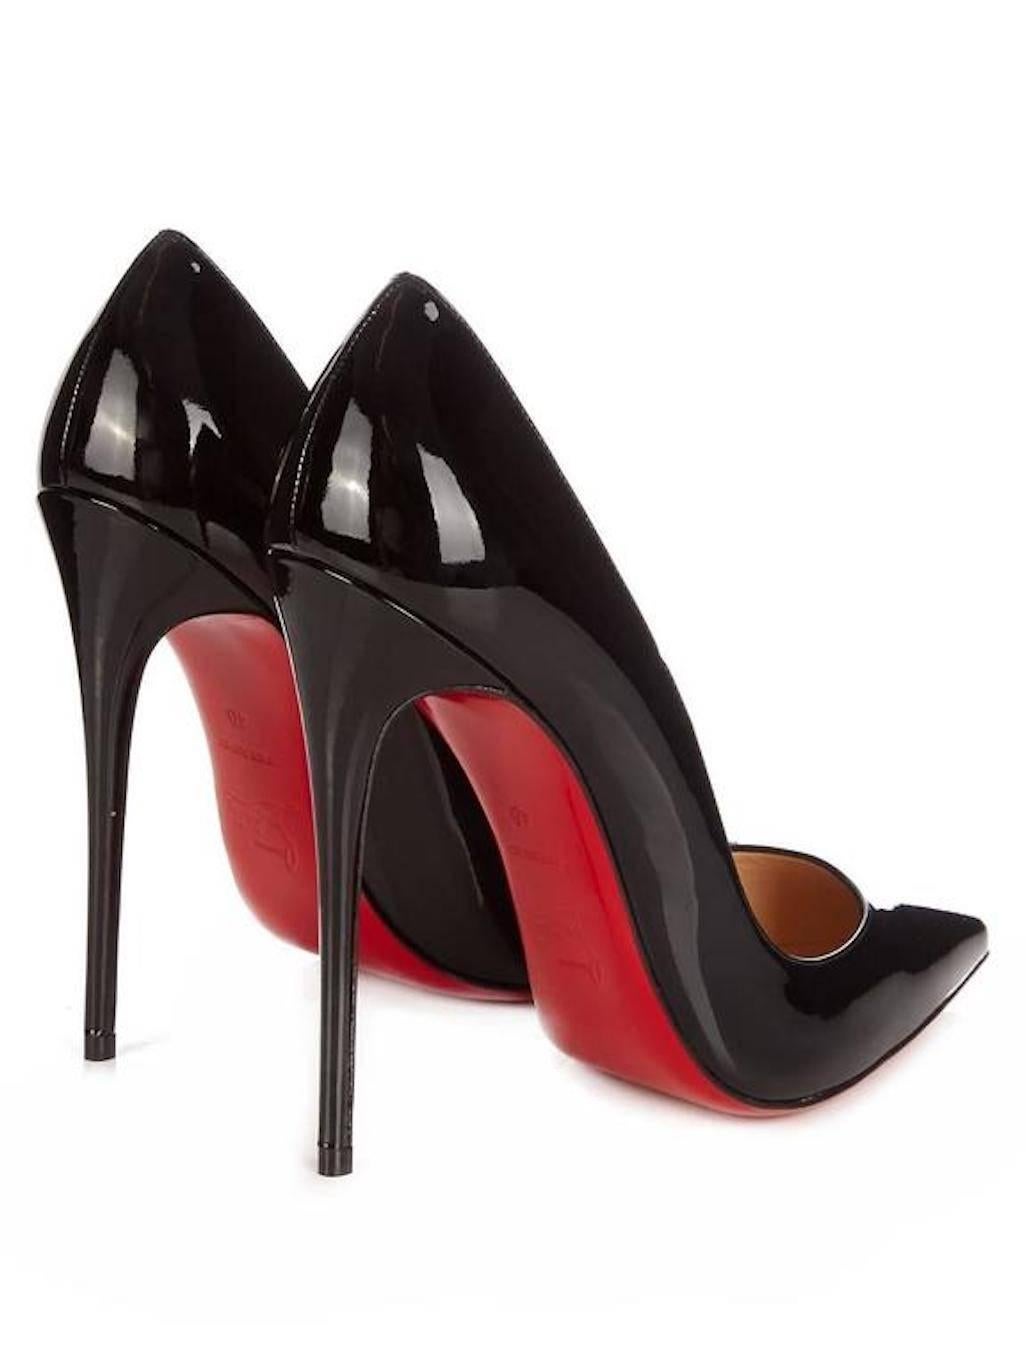 Christian Louboutin New Sold Out Black Patent Leather So Kate Pumps Heels in Box 1